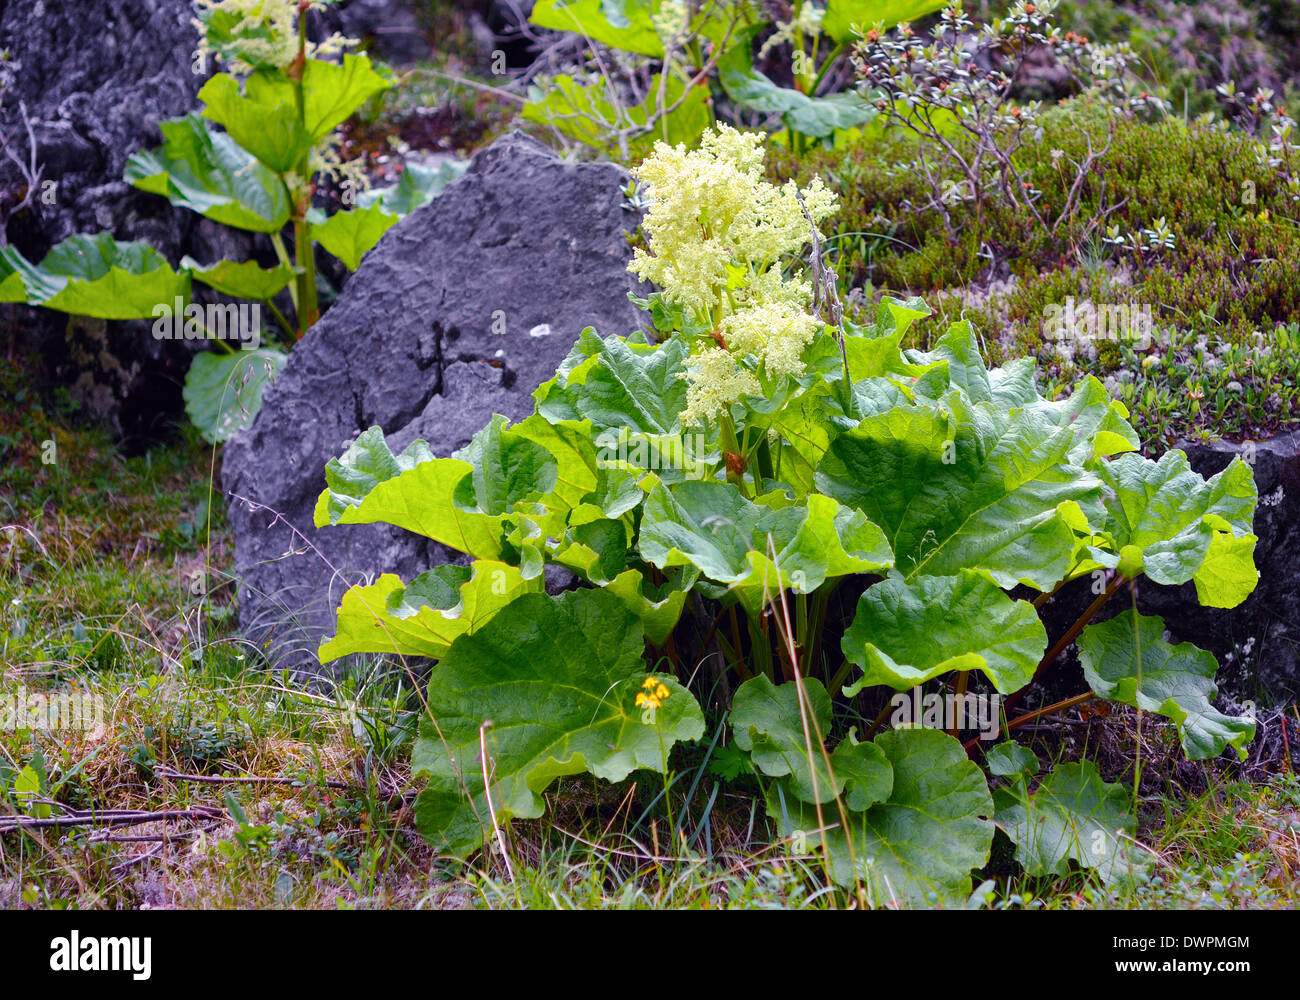 Wild rhubarb (Rheum altaicum L.) growing in the mountains near the stone Stock Photo